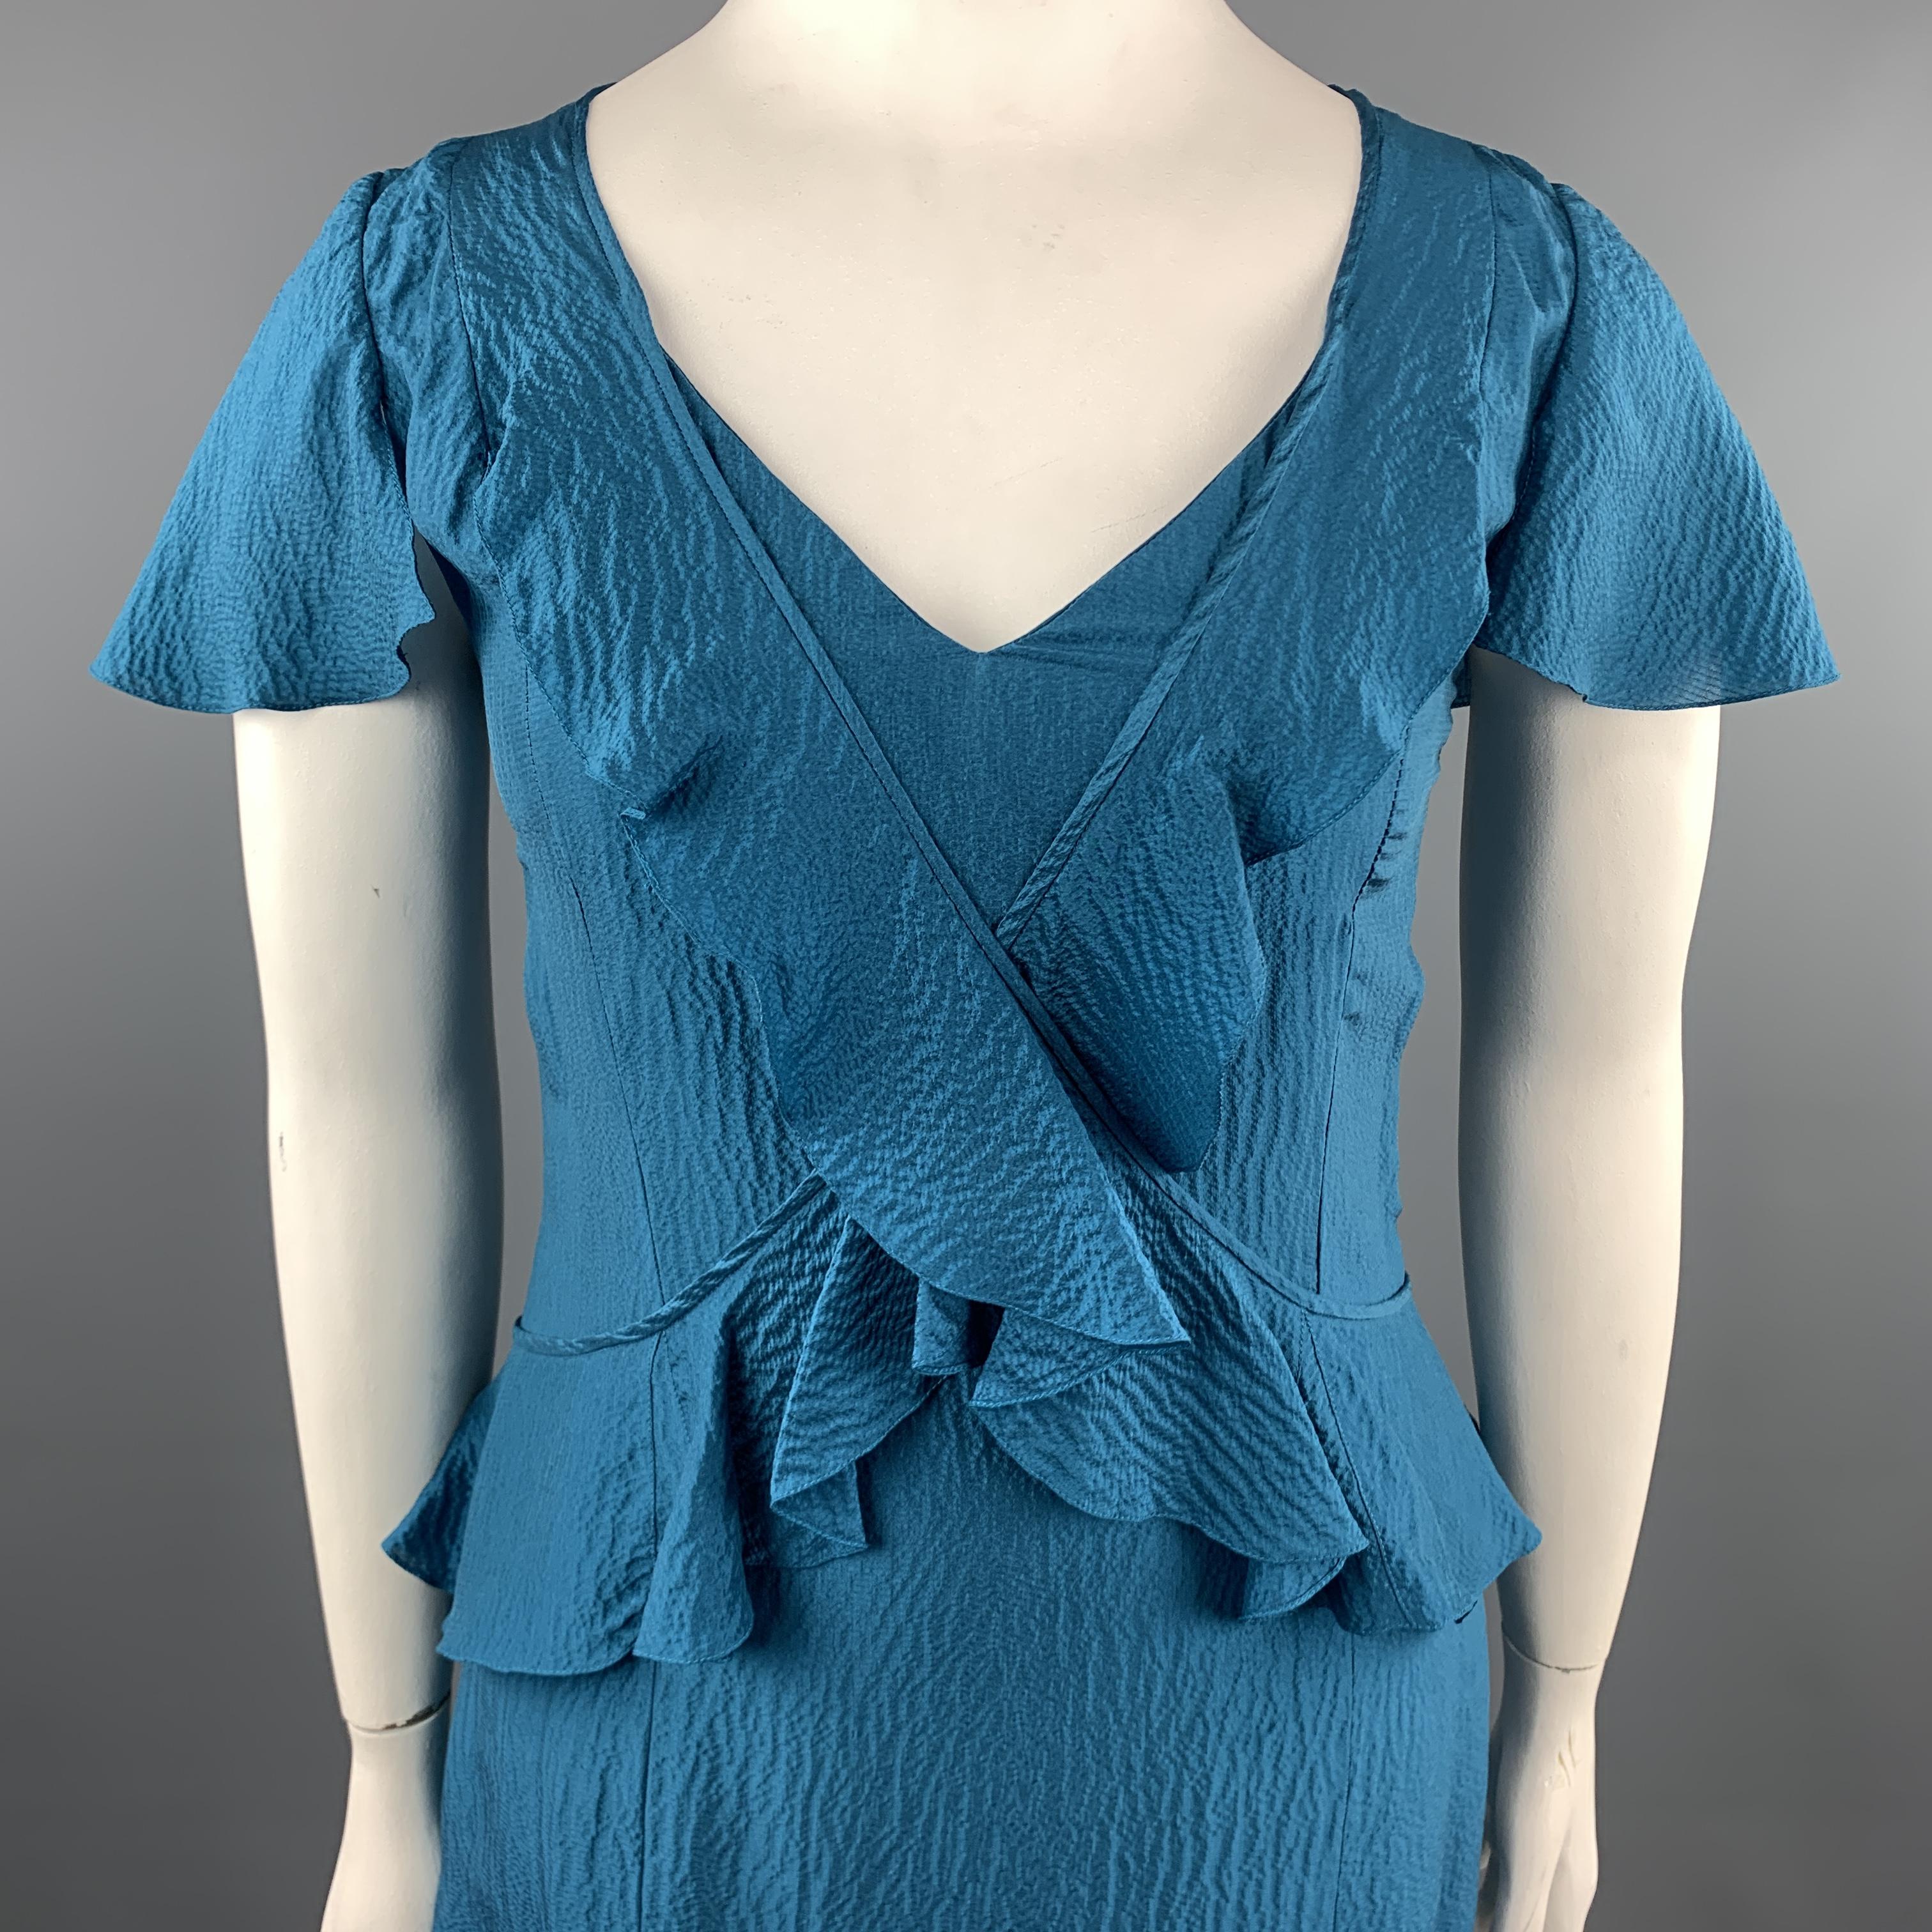 CAROLINA HERRERA dress comes in teal textured satin with a V neck, short sleeves, pleat ruffle hem, and cross ruffle overlay. 

Excellent Pre-Owned Condition.
Marked: 12

Measurements:

Shoulder: 17 in.
Bust: 38 in.
Waist: 34 in.
Hip: 42 in.
Sleeve: